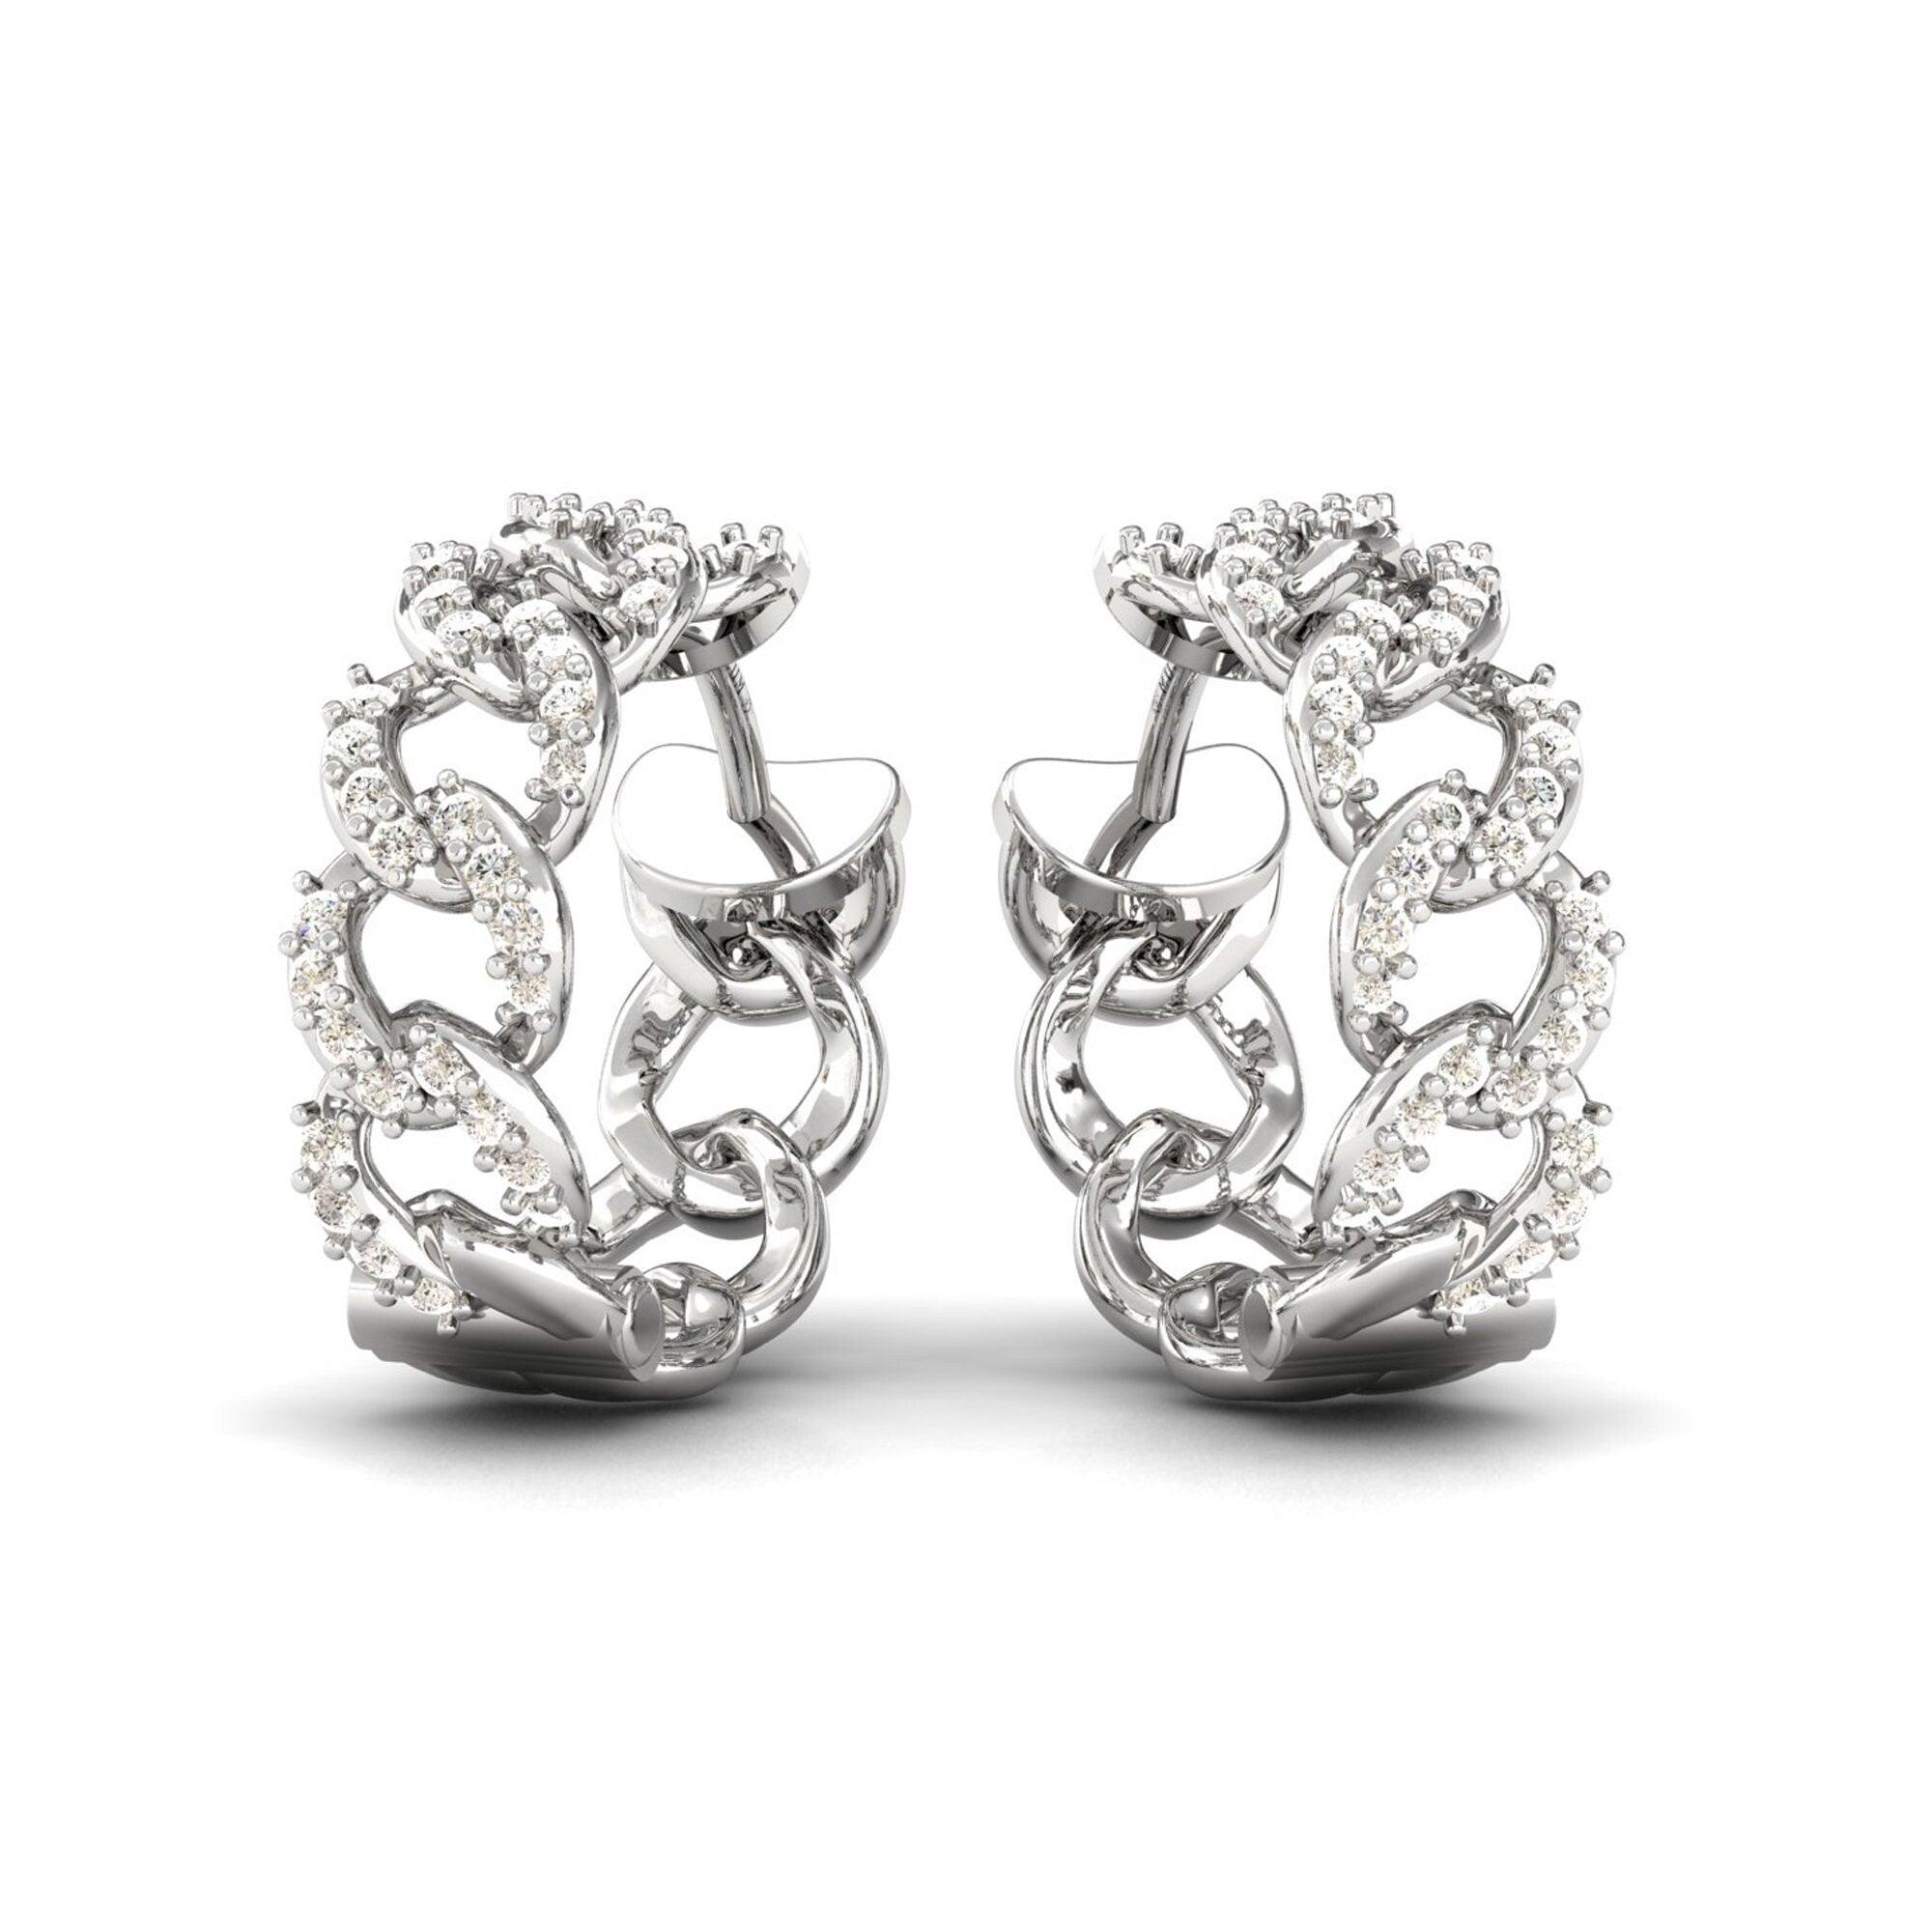 18ct White Gold Small Thin Hoop Earrings | Auric Jewellery